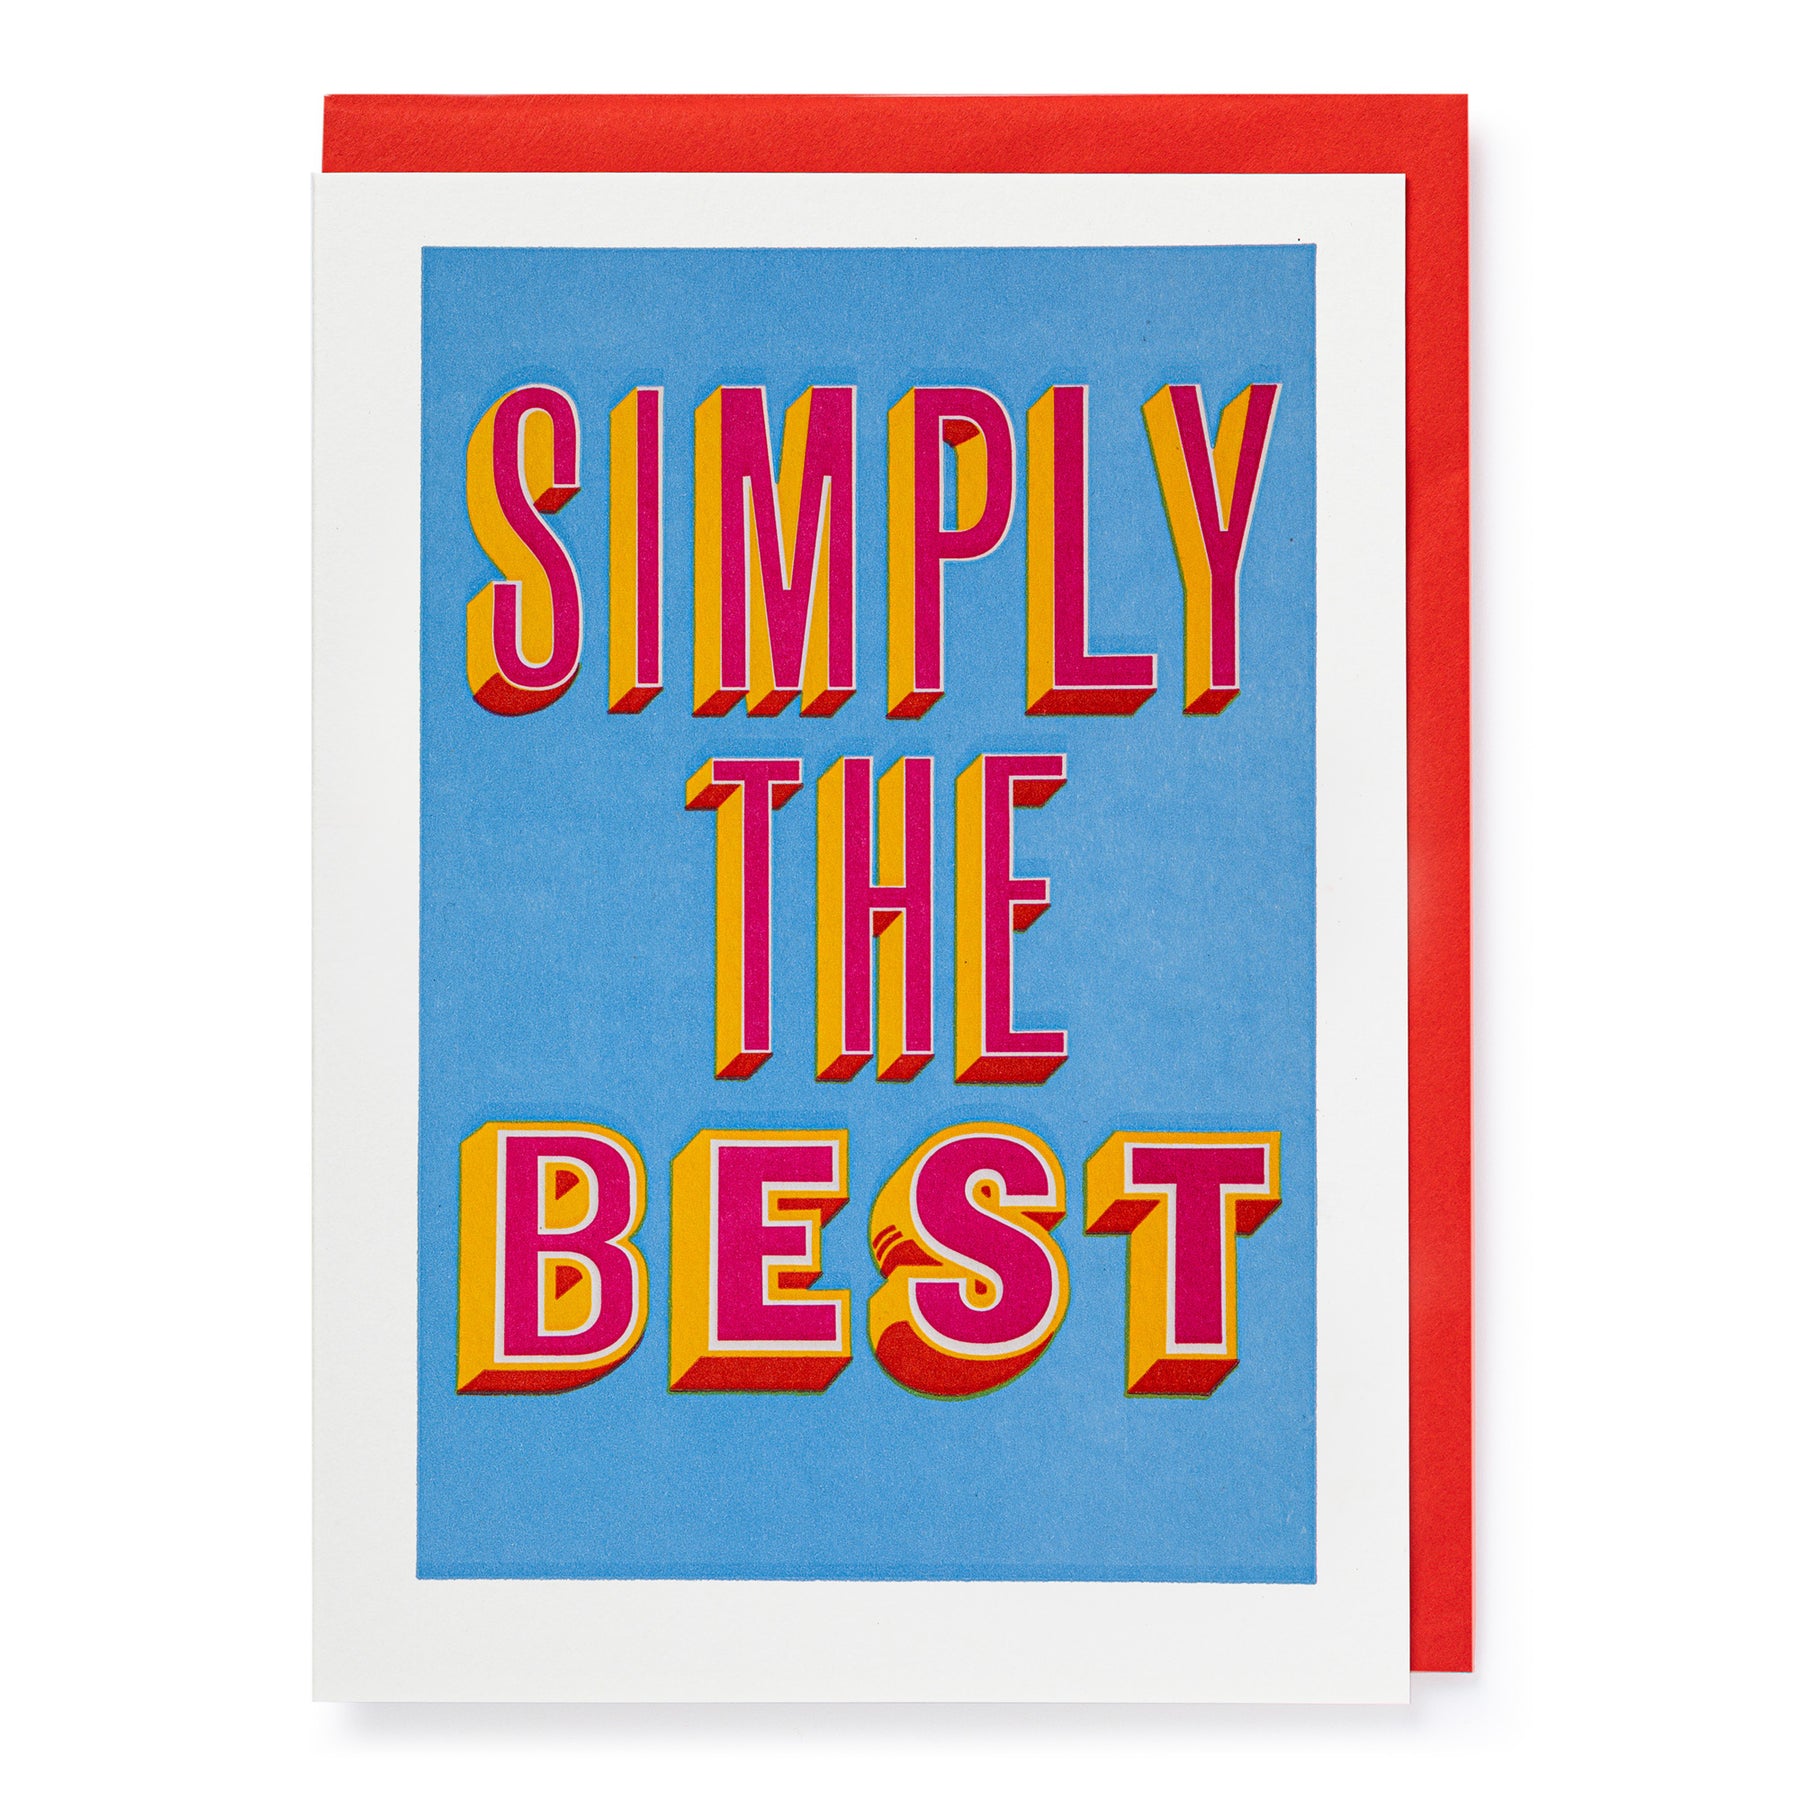 Simply the Best - letterpress printed greeting card